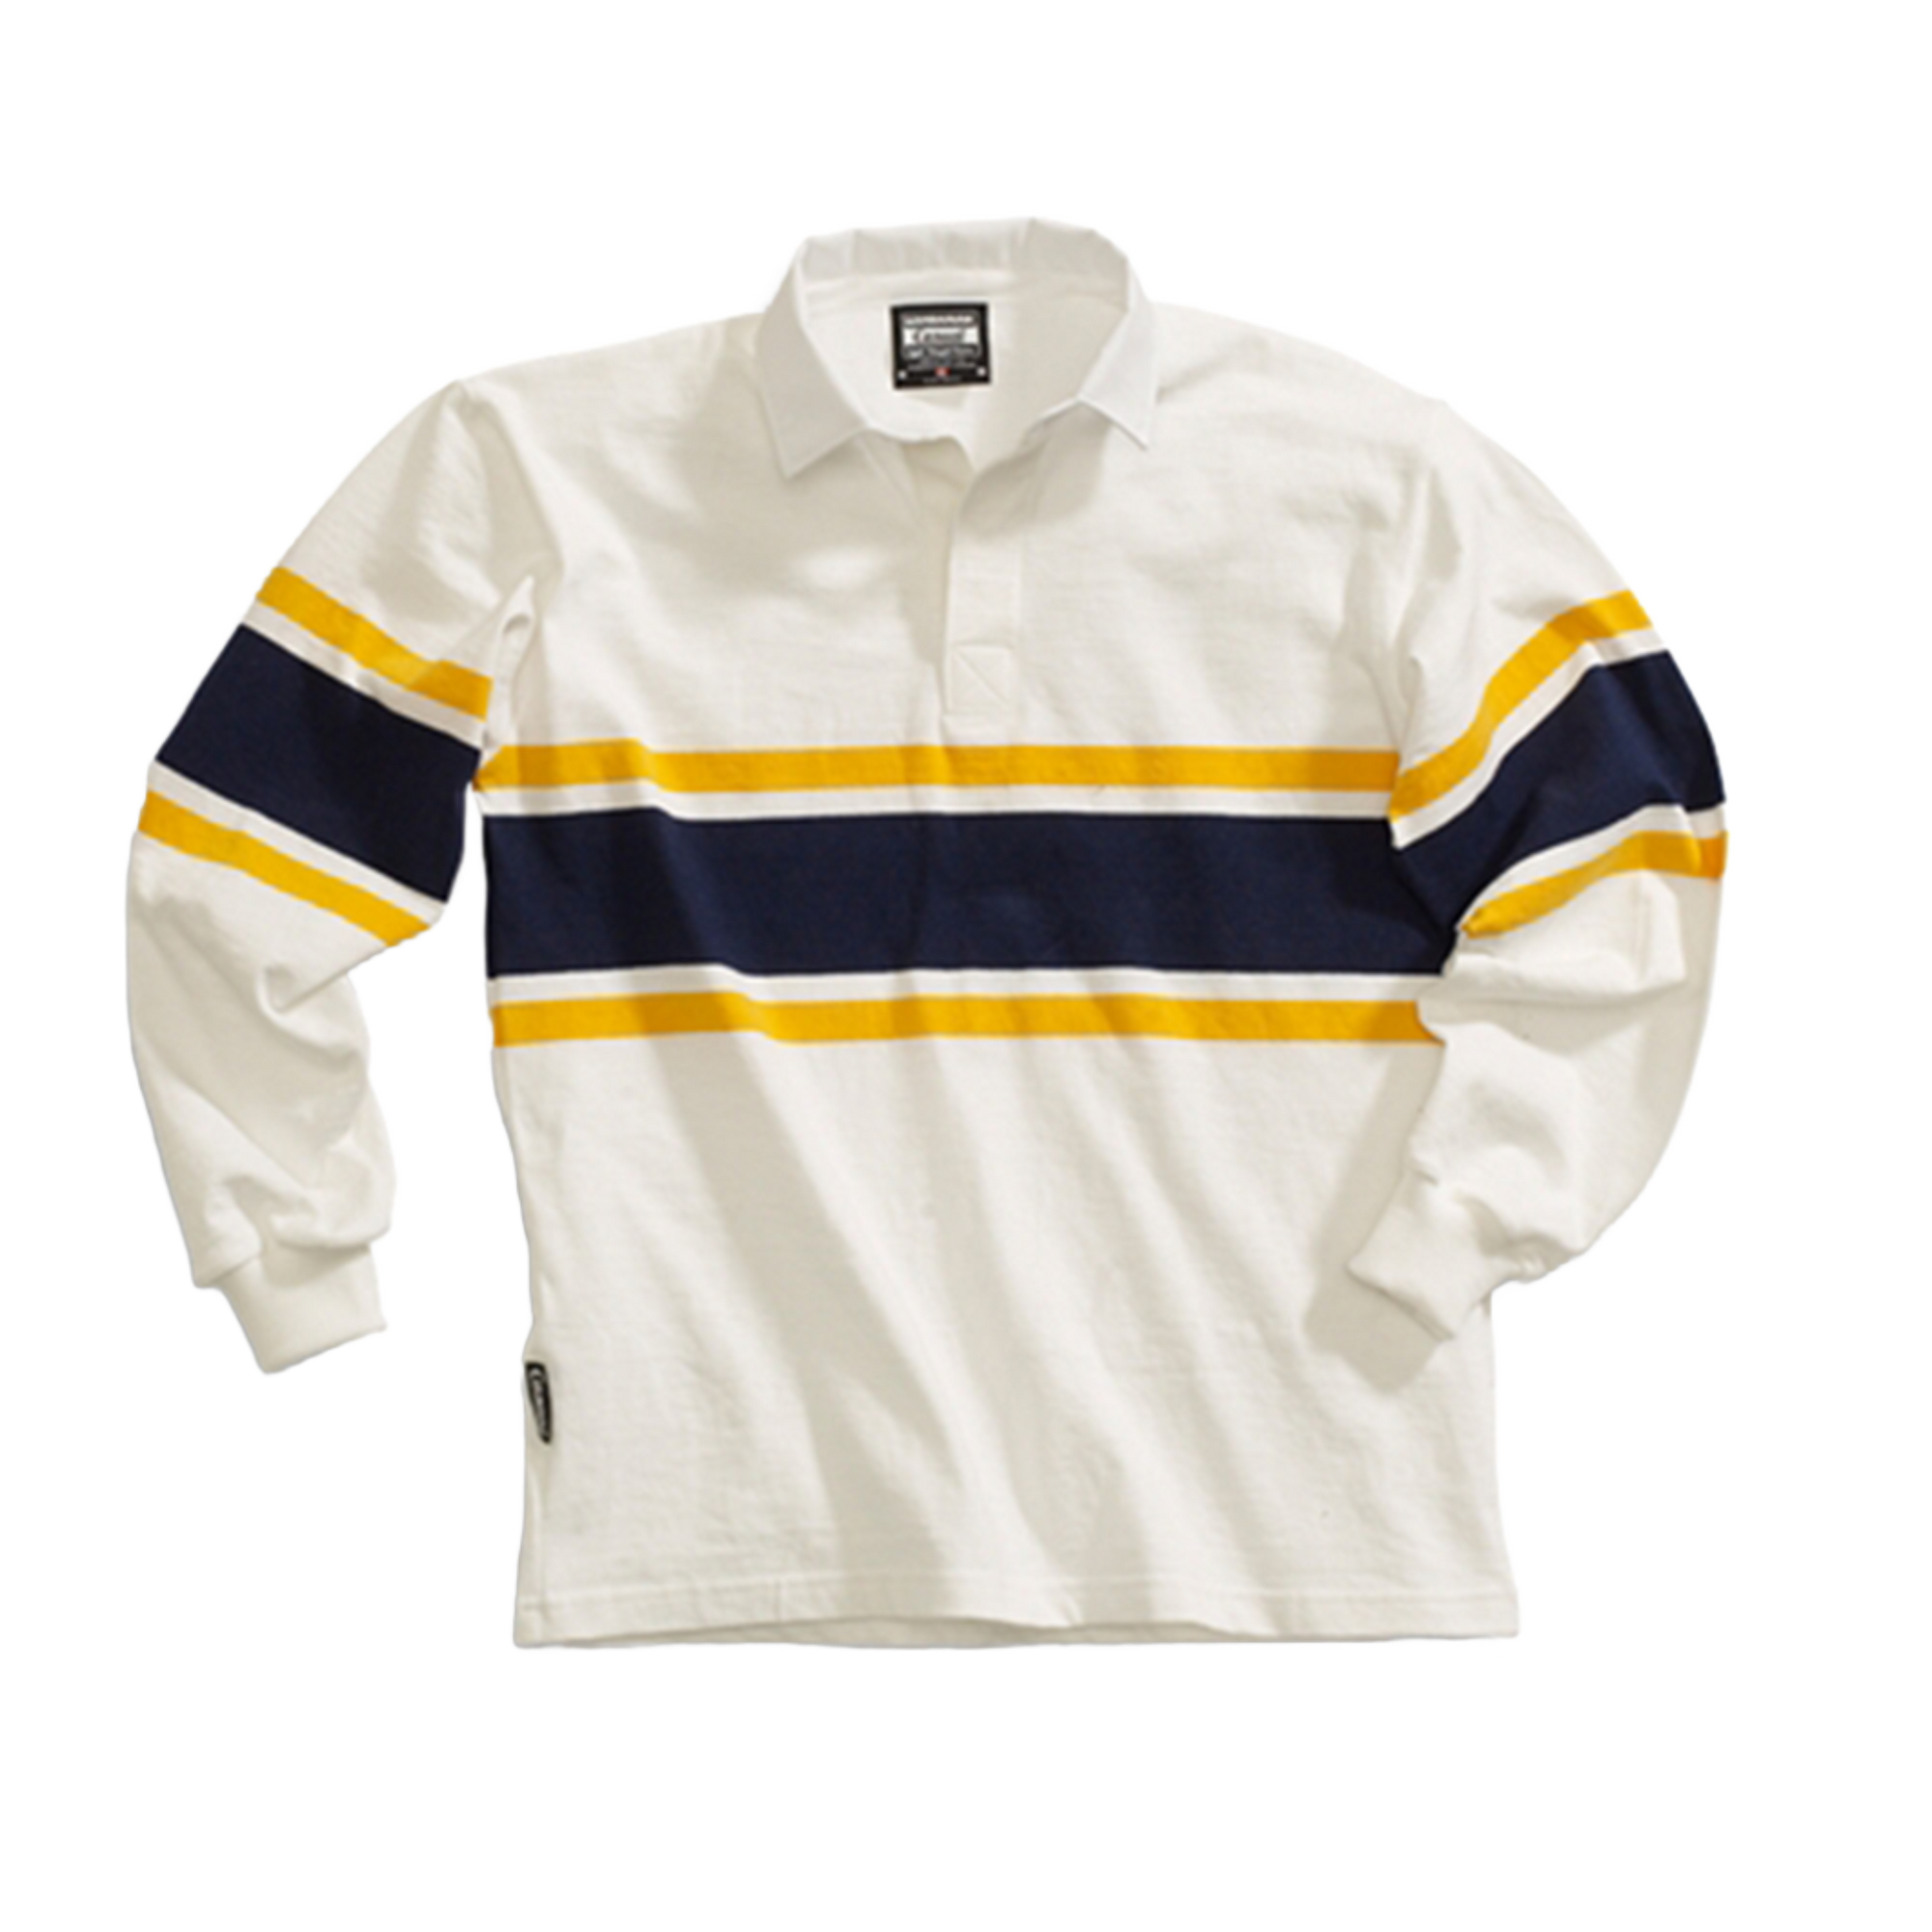 Barbarian Long Sleeve Cotton Jersey - Adult Unisex - White/Gold/Navy